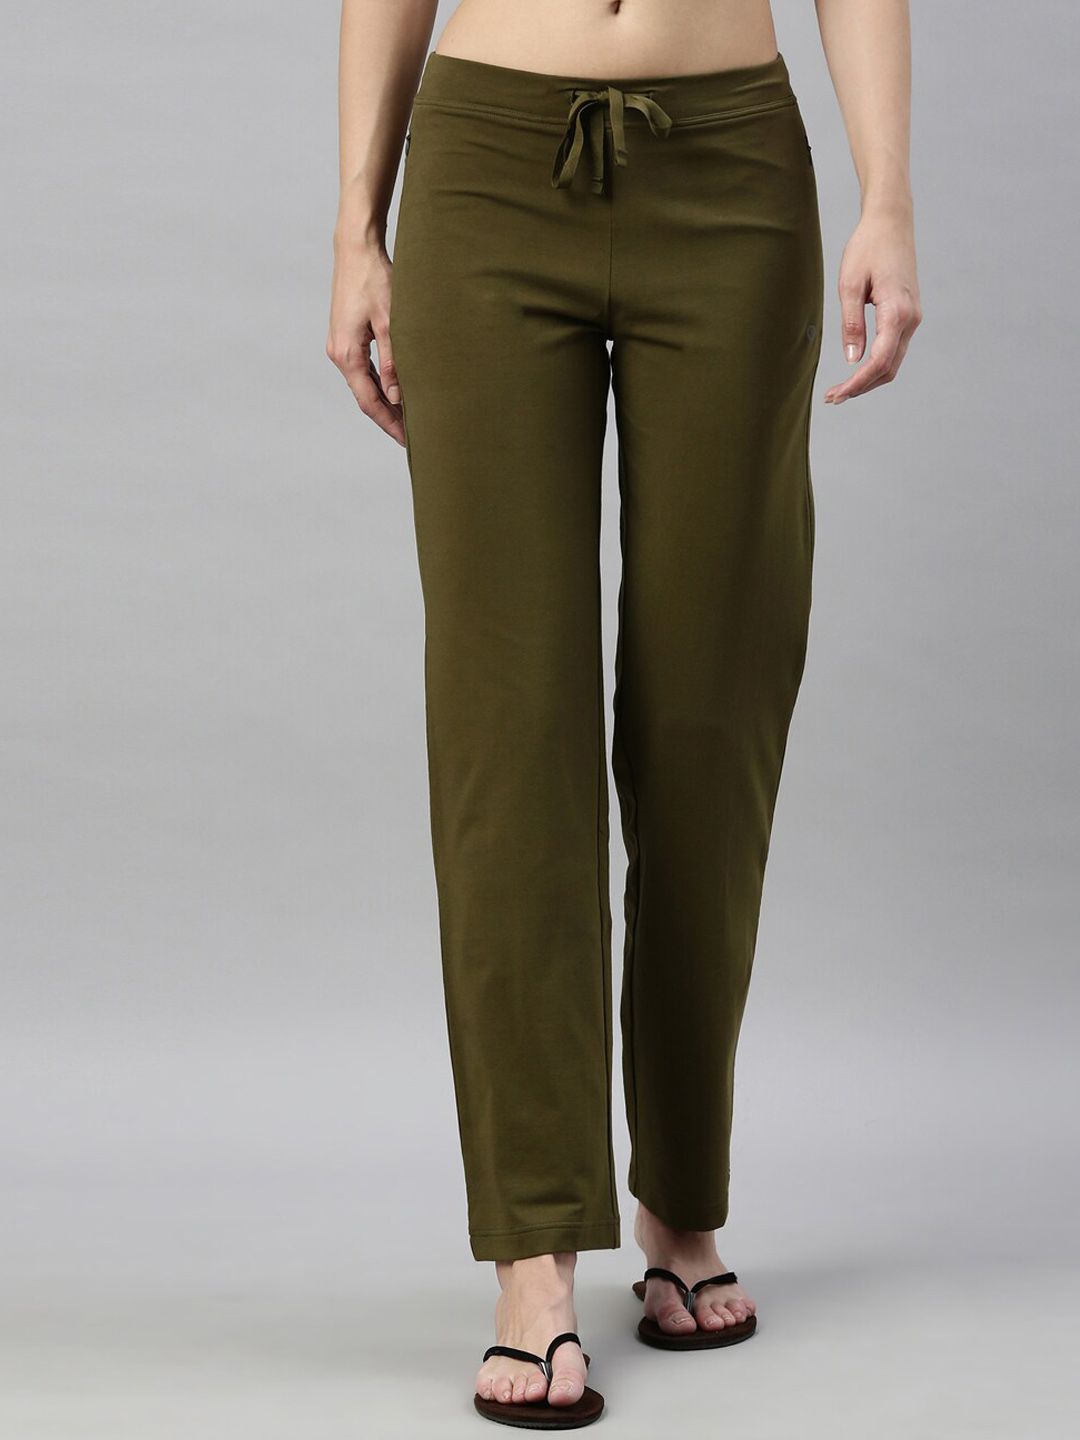 Enamor Women Green Solid Cotton Slim-Fit Lounge Pants Price in India